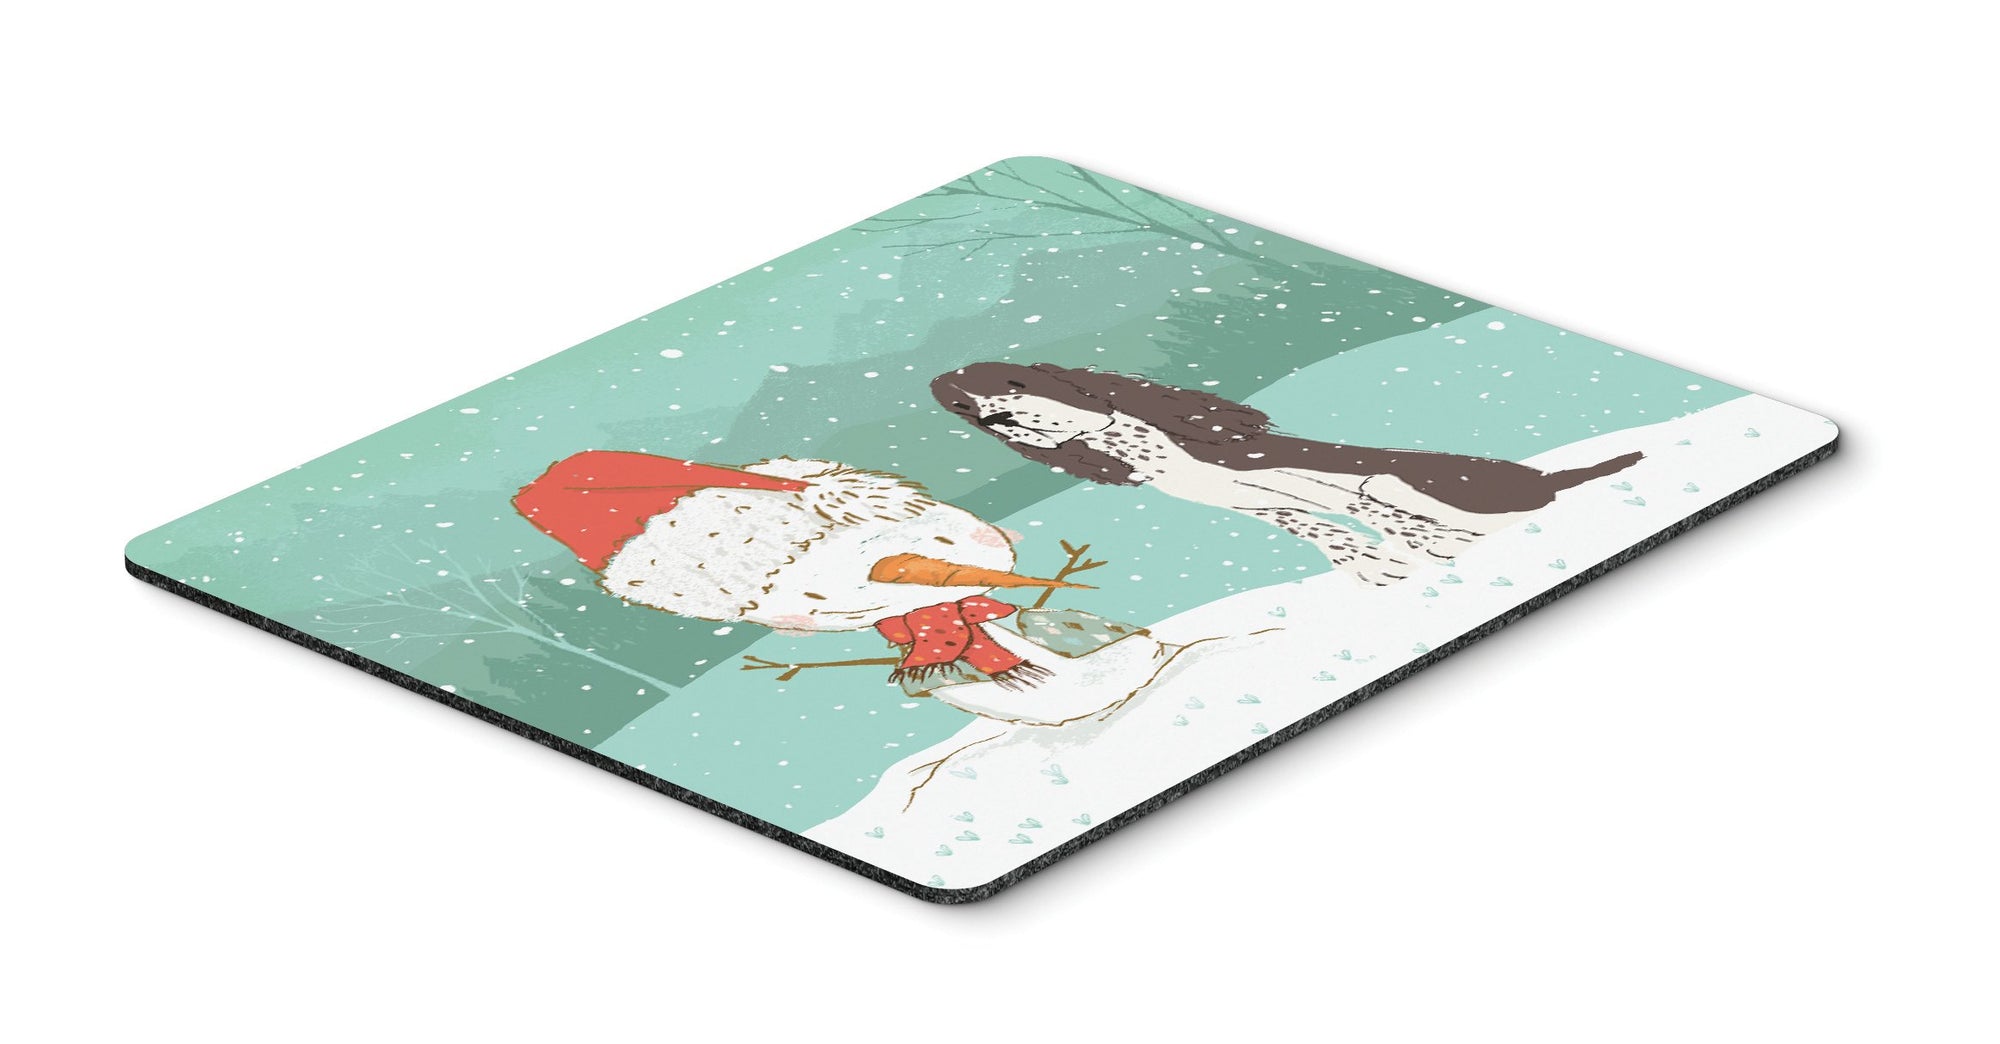 Brown English Springer Spaniel Snowman Christmas Mouse Pad, Hot Pad or Trivet CK2074MP by Caroline's Treasures